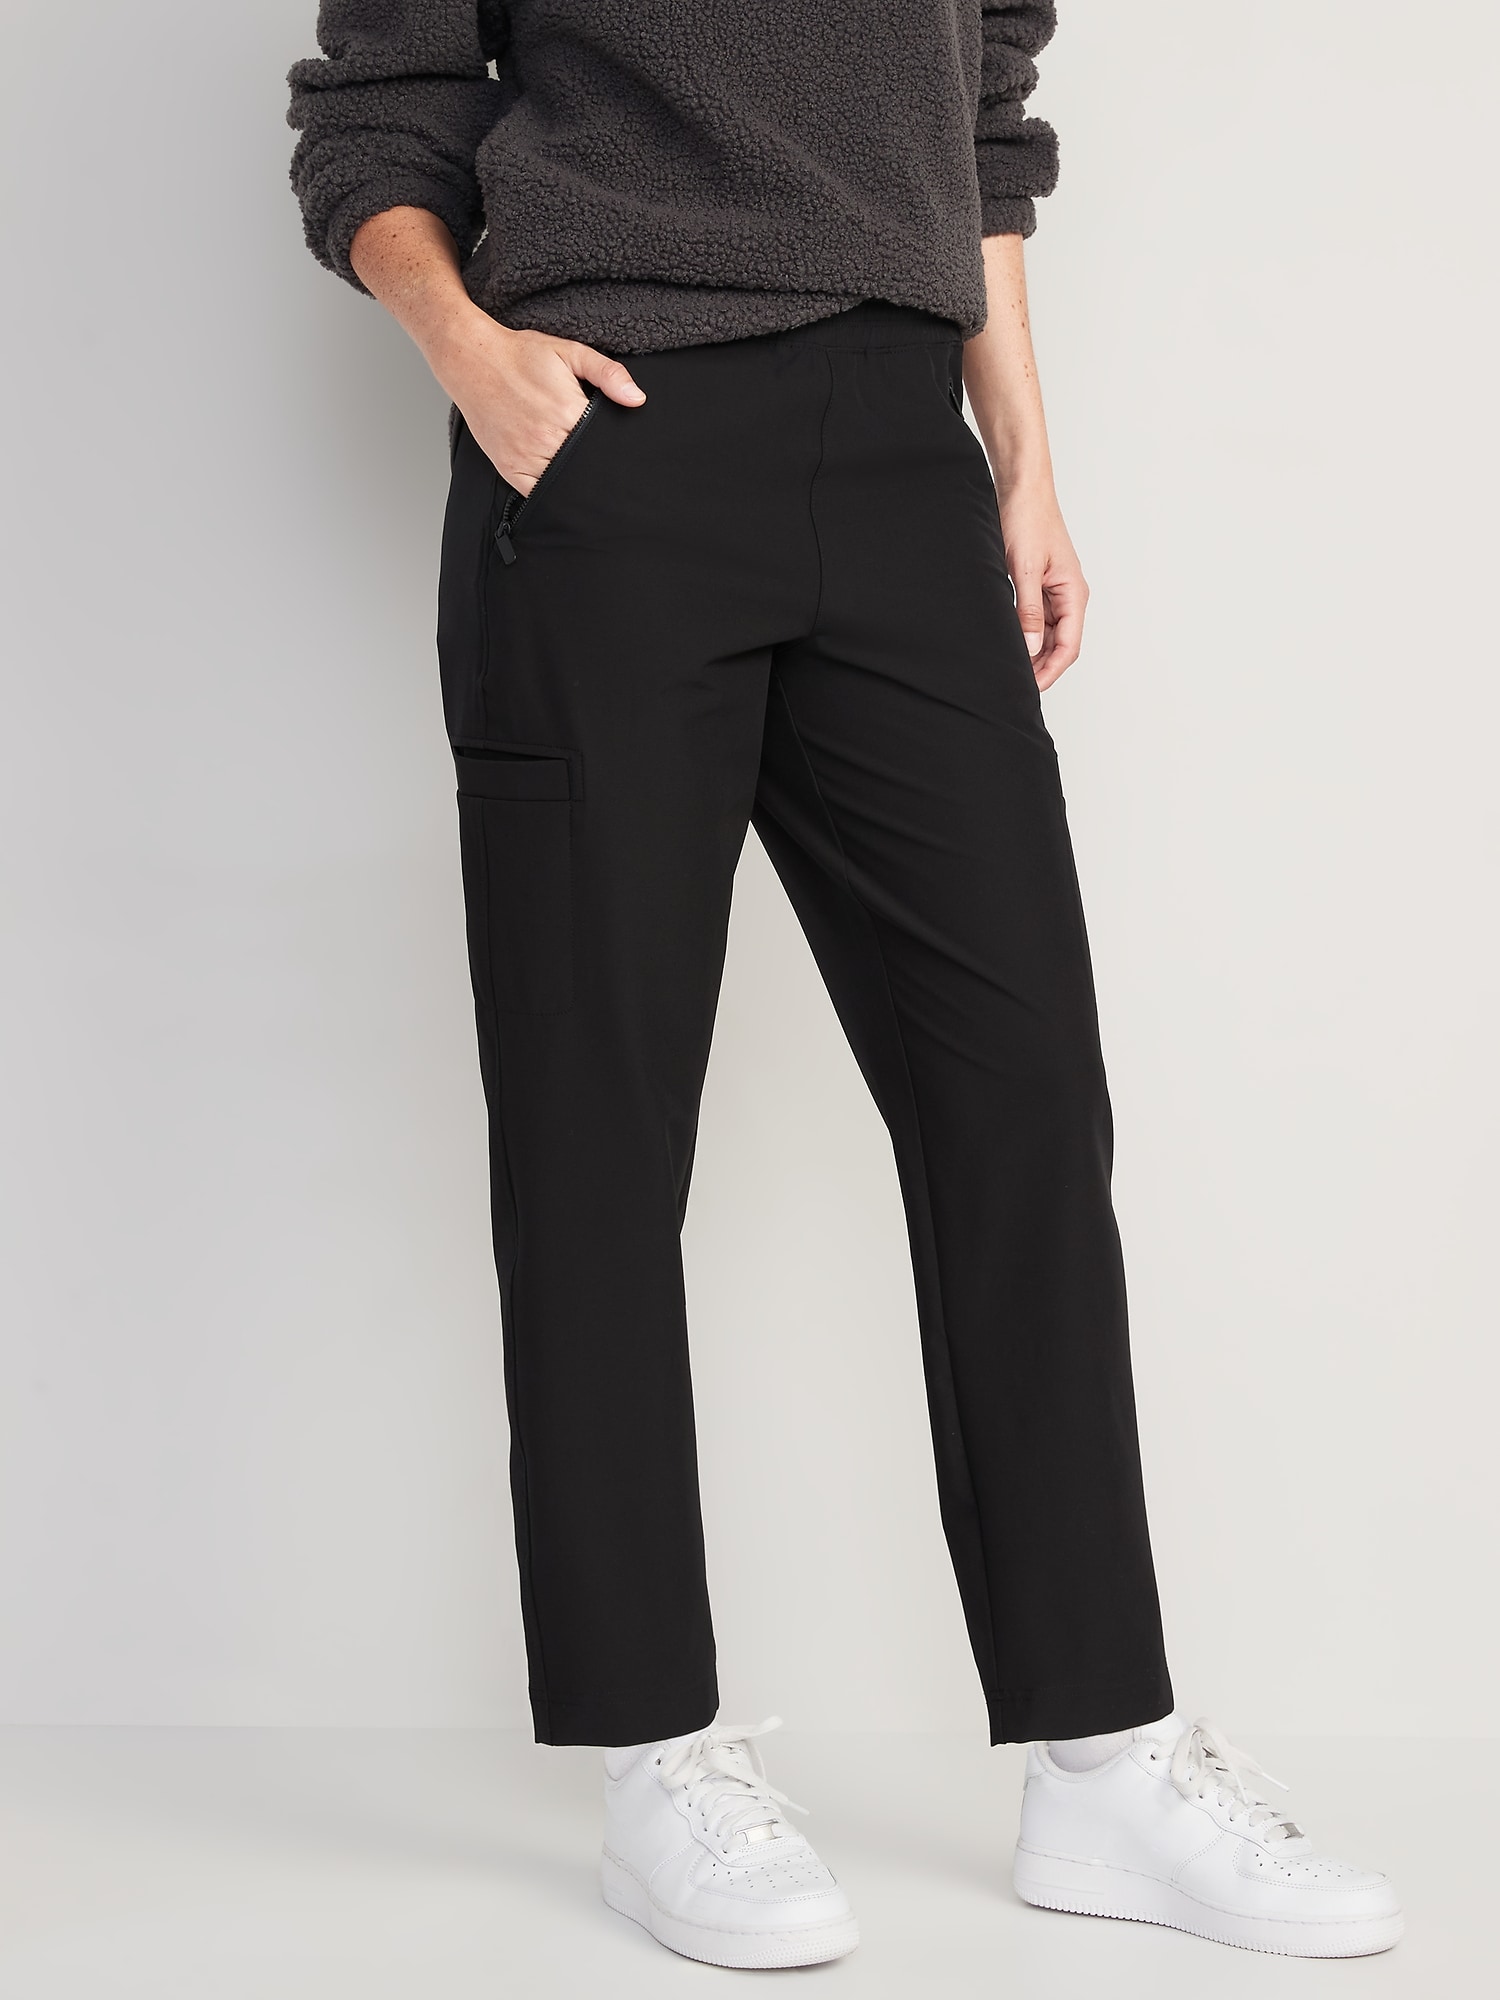 Old Navy High-Waisted All-Seasons StretchTech Slouchy Taper Cargo Pants for Women black. 1